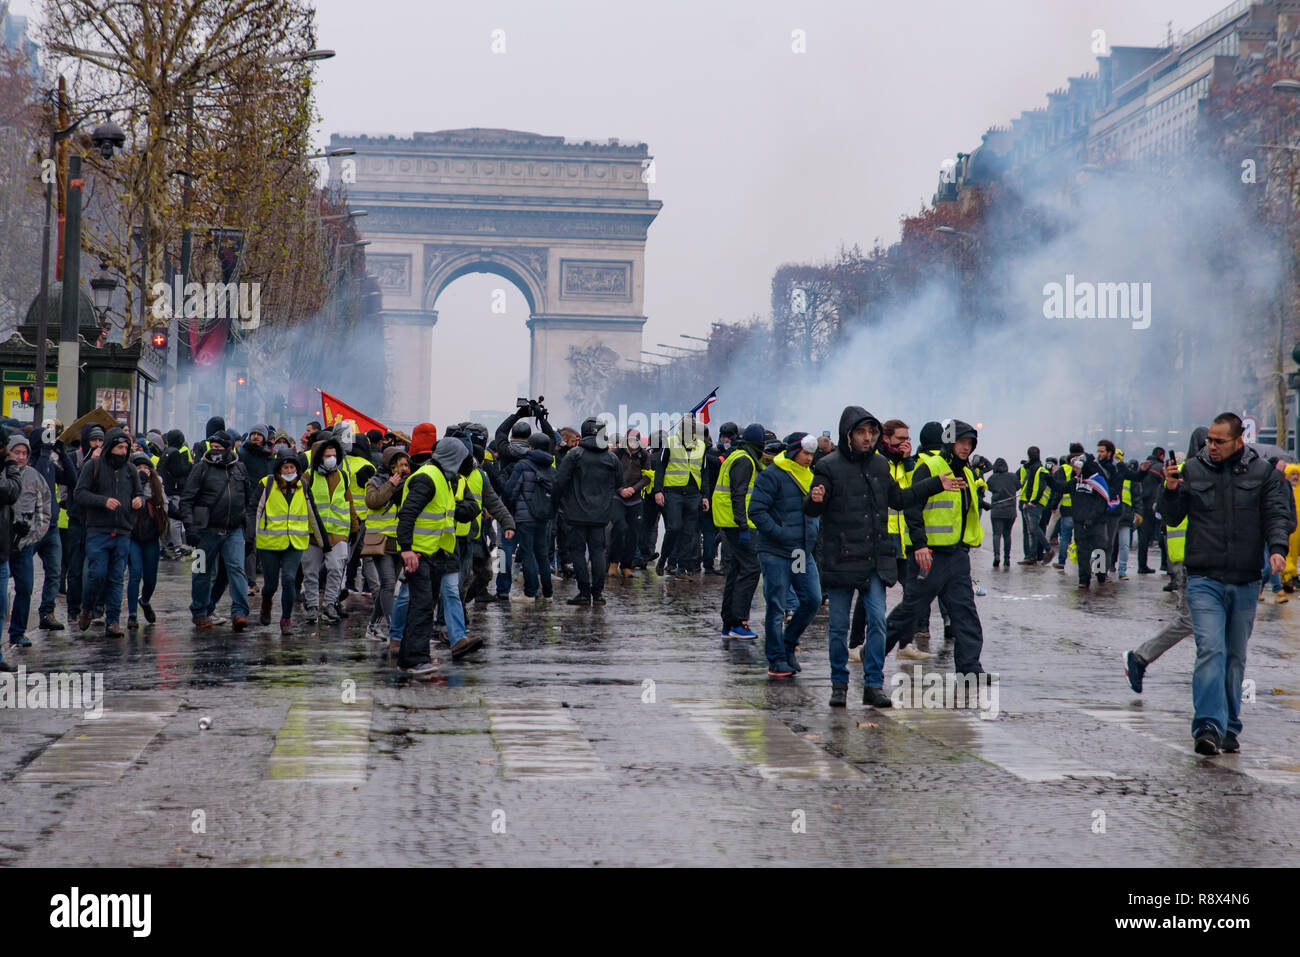 Riot police firing tear gas at Yellow Vests demonstration (Gilets Jaunes) protesters against government and French President at Champs-Élysées Stock Photo